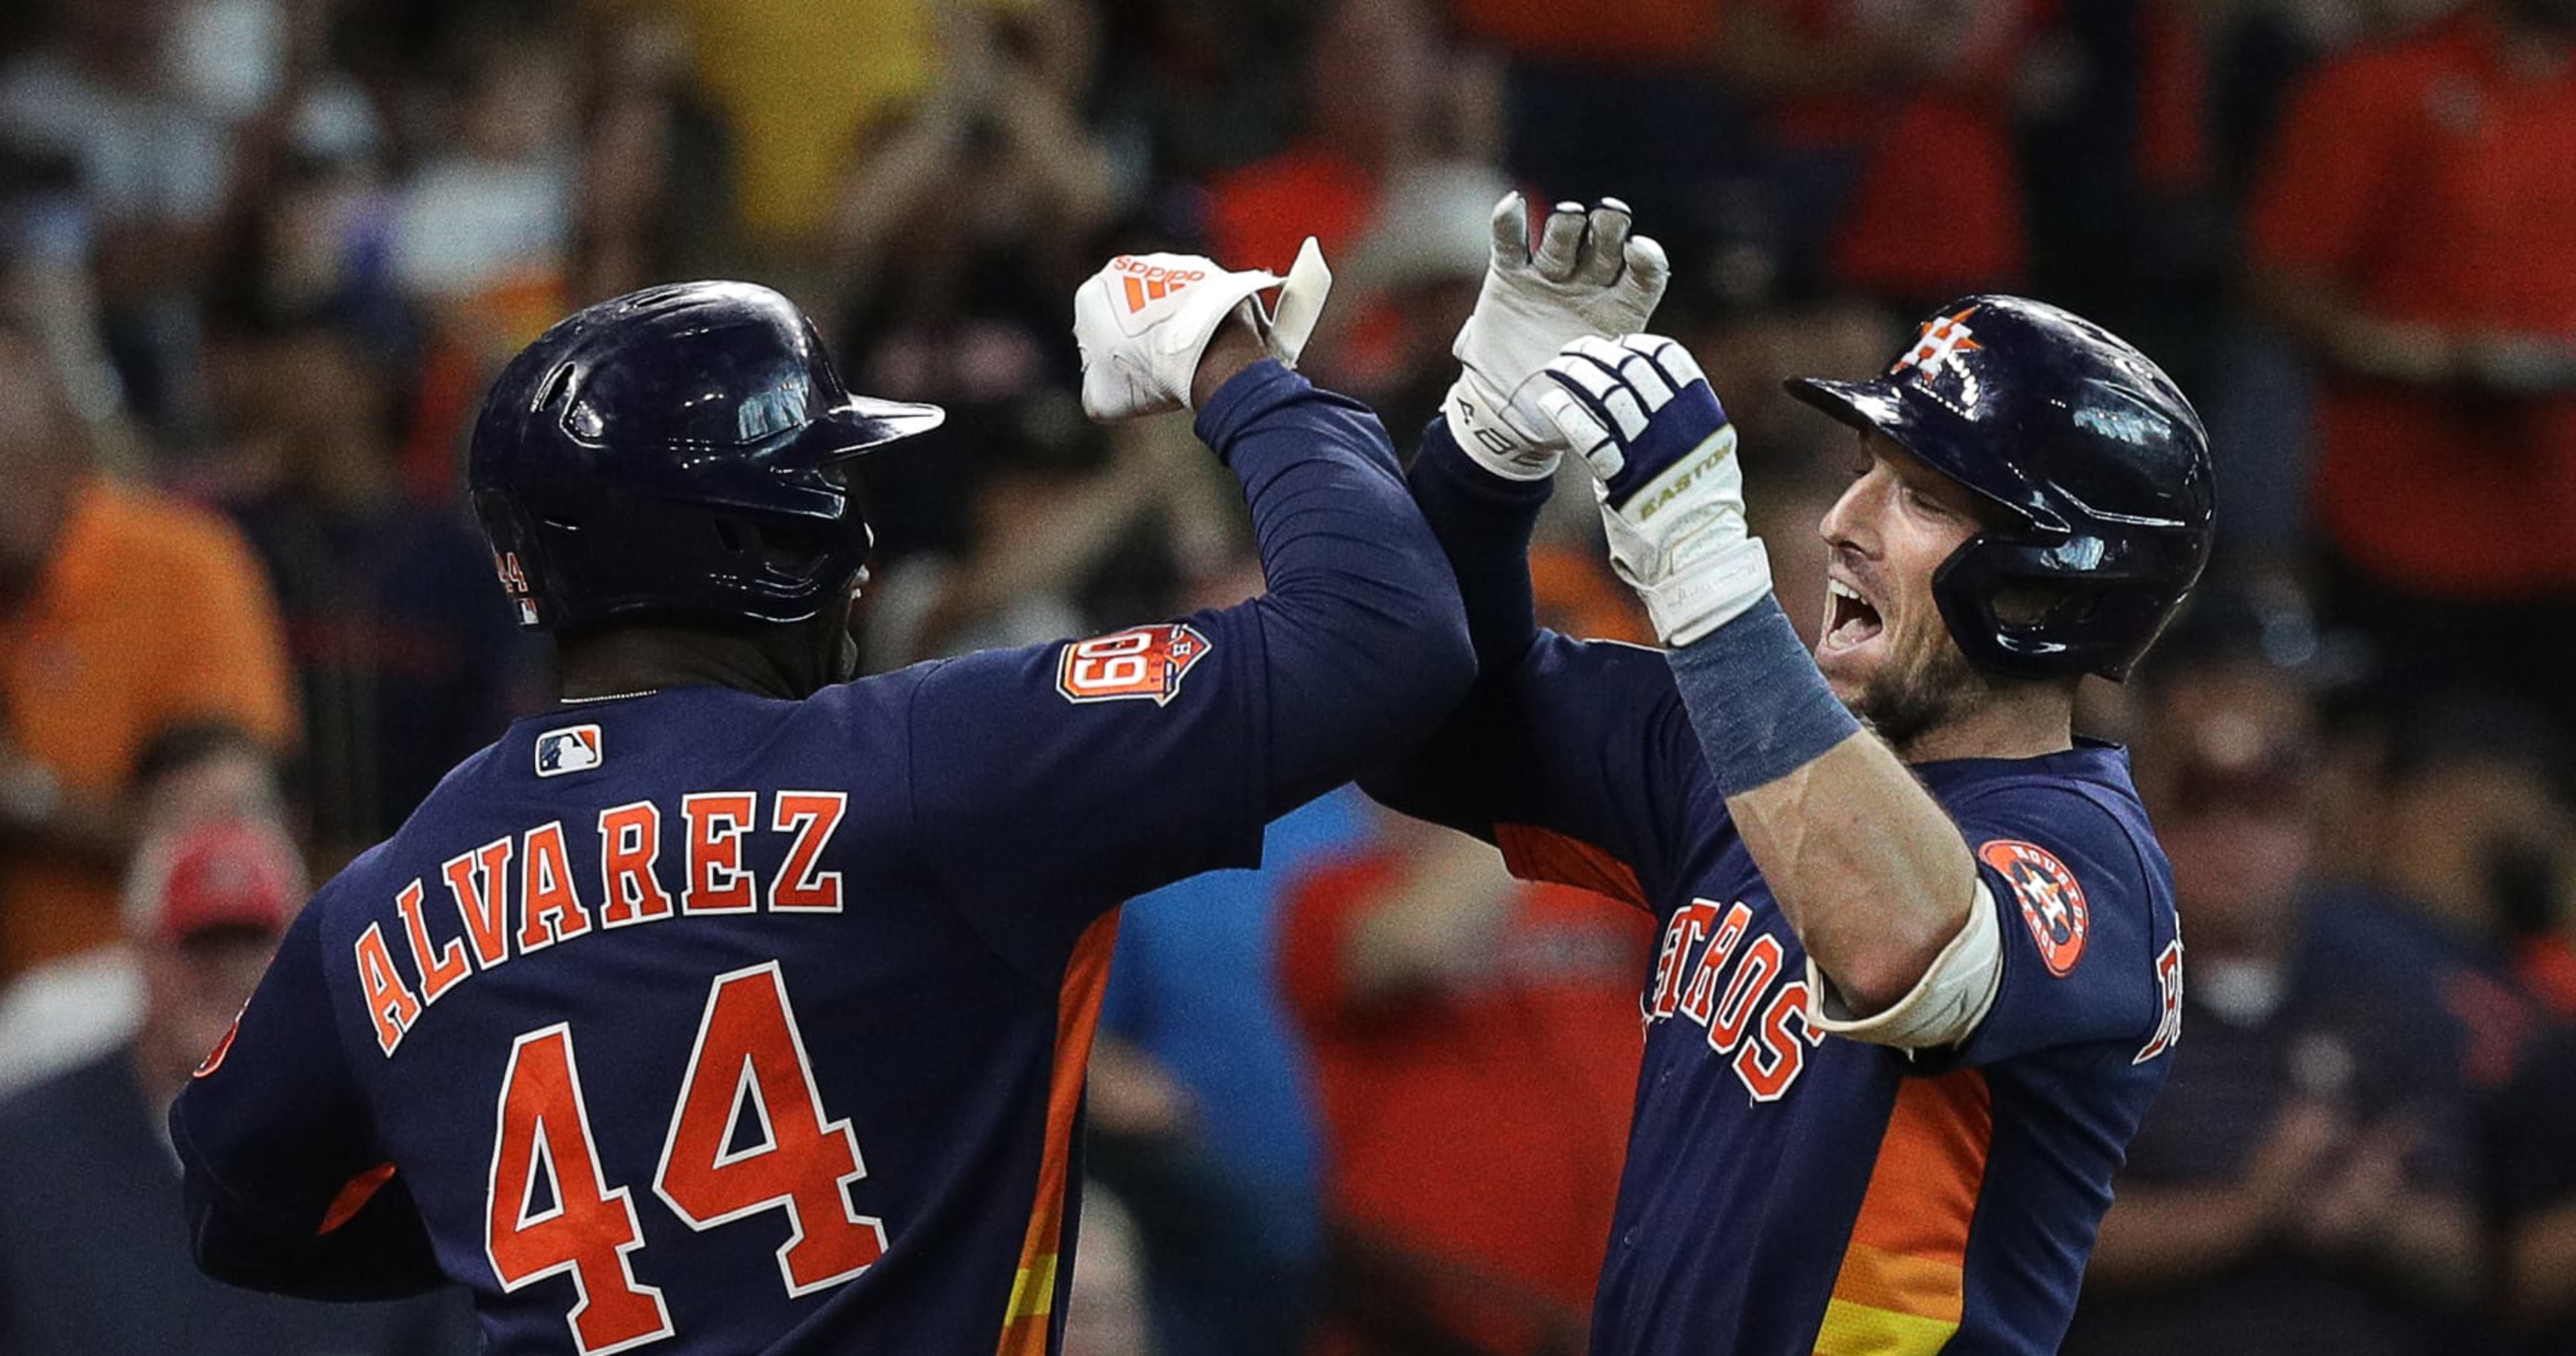 Astros Clinch 2022 MLB Playoff Spot with Win vs. A's, Orioles Loss